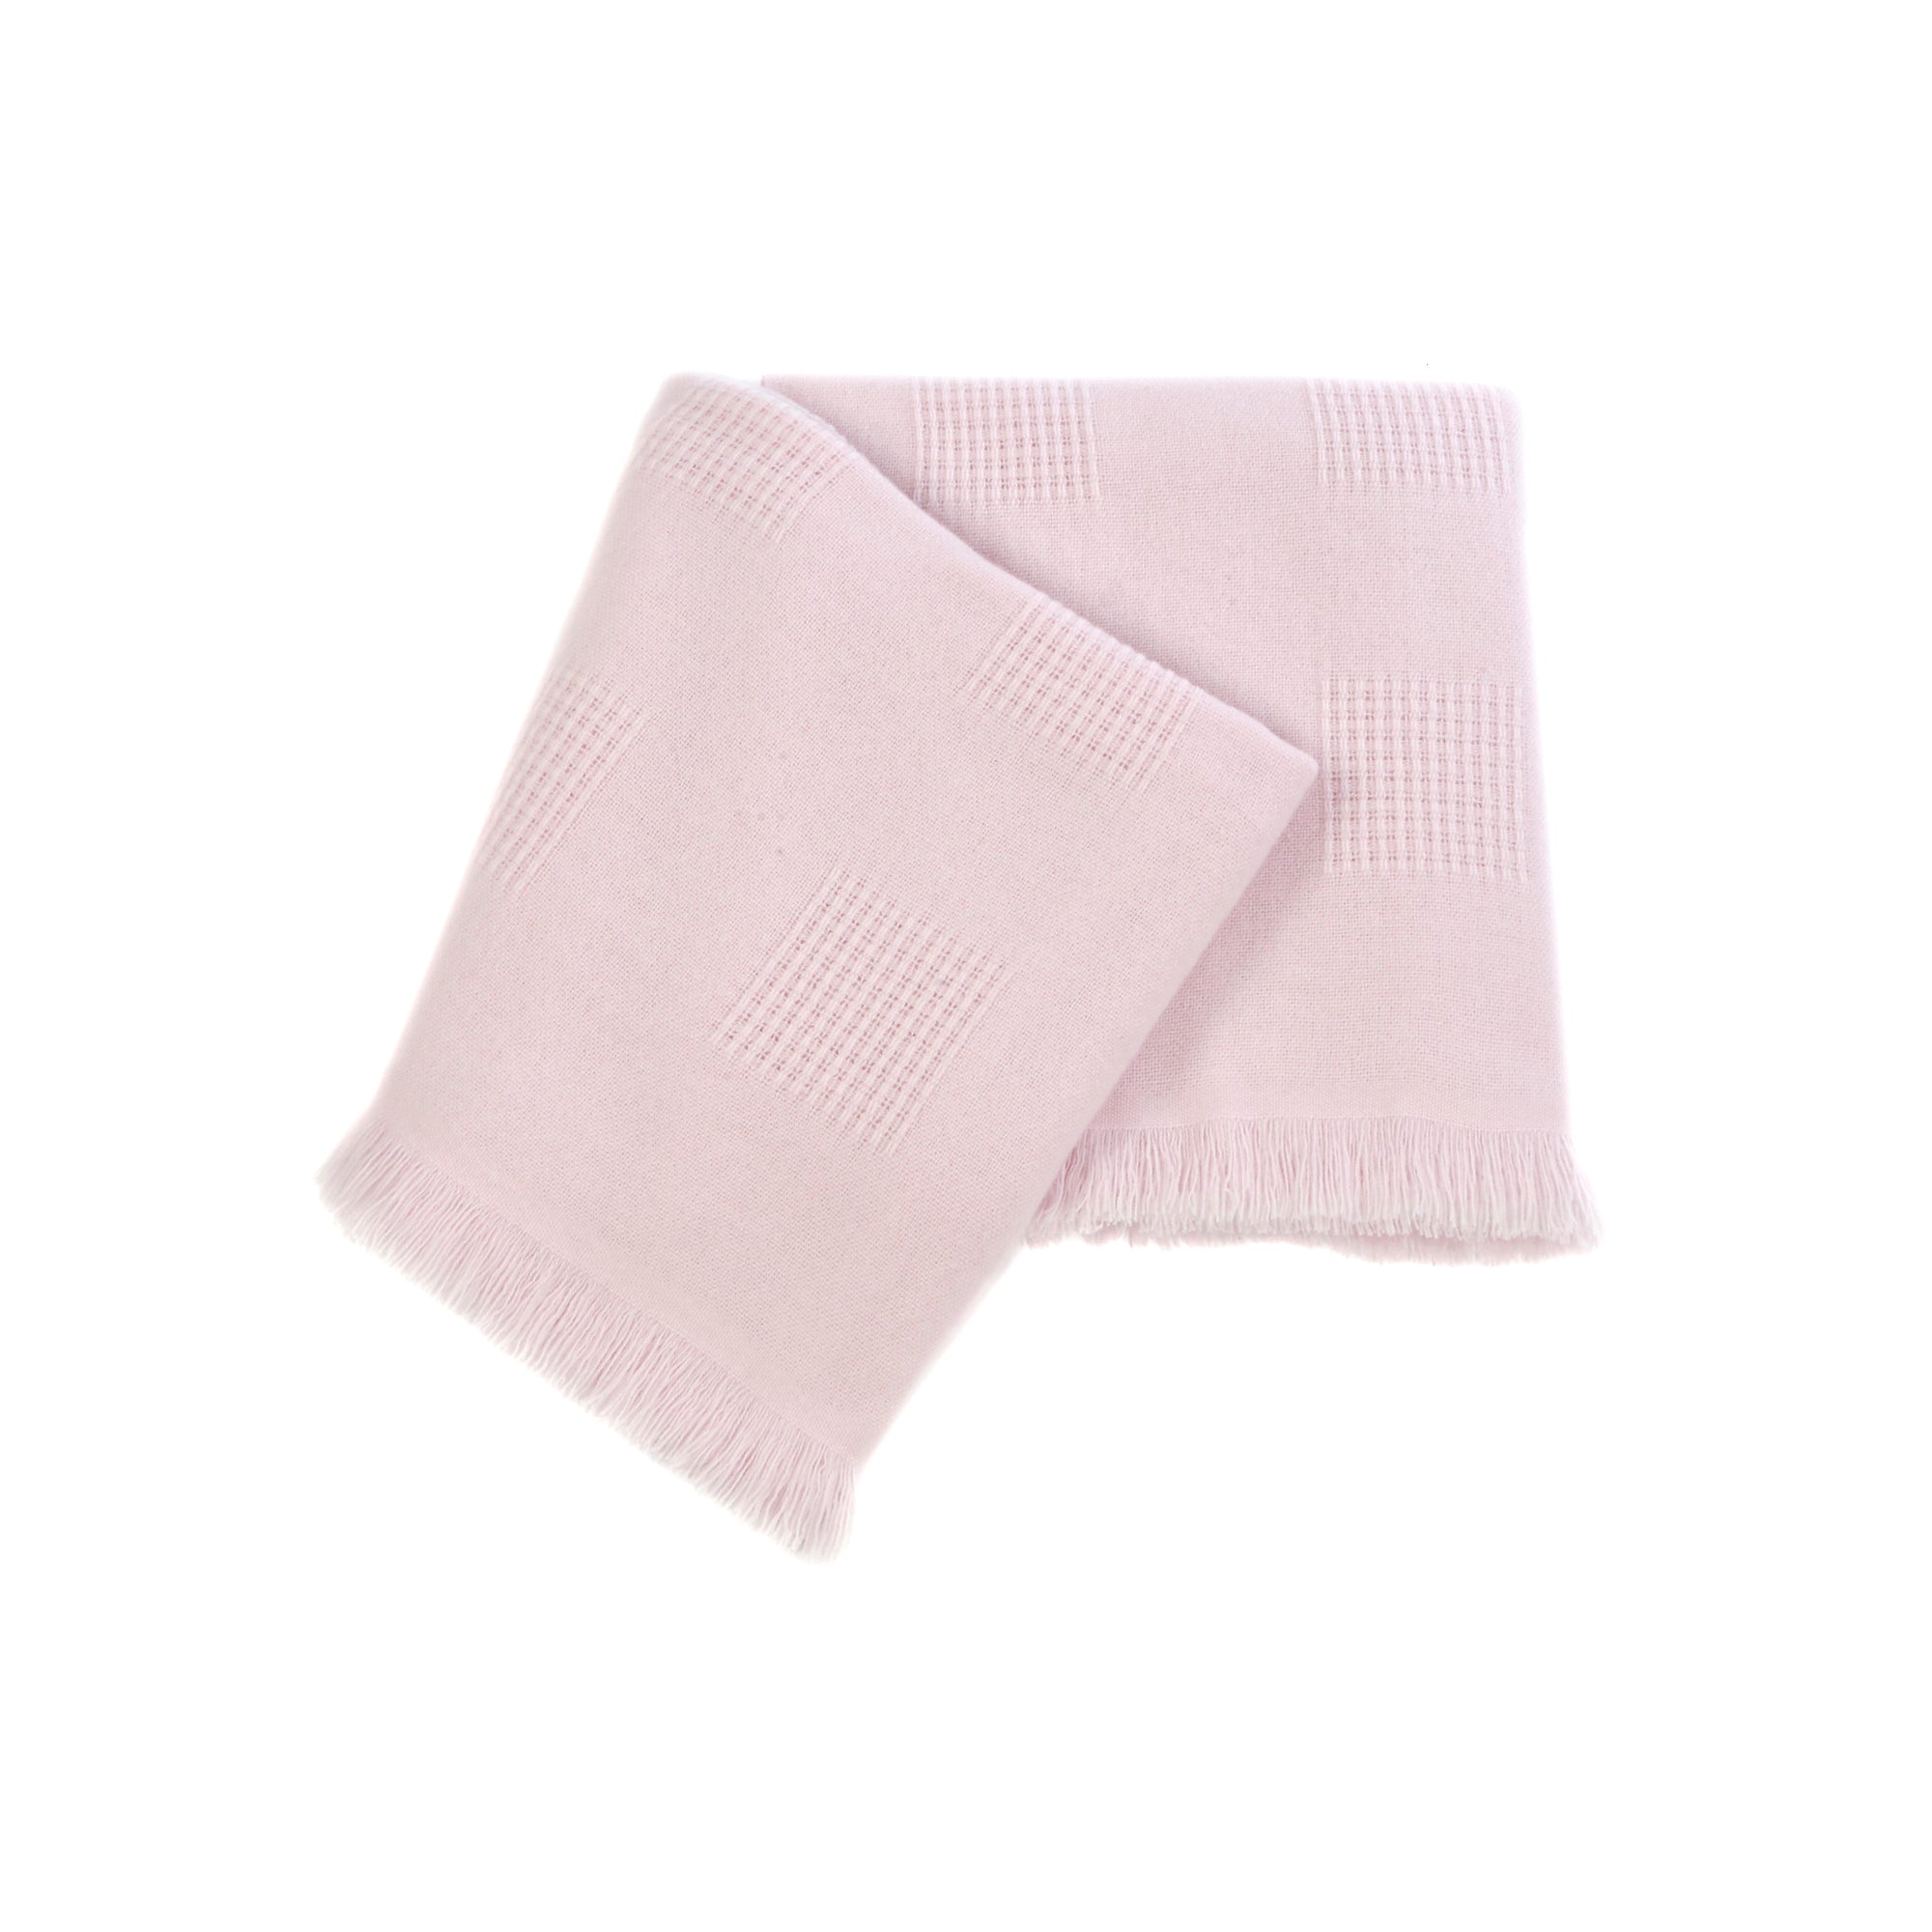 Farnese Soft Pink 100% Cashmere Single Plaid with short fringes - Alternative view 1